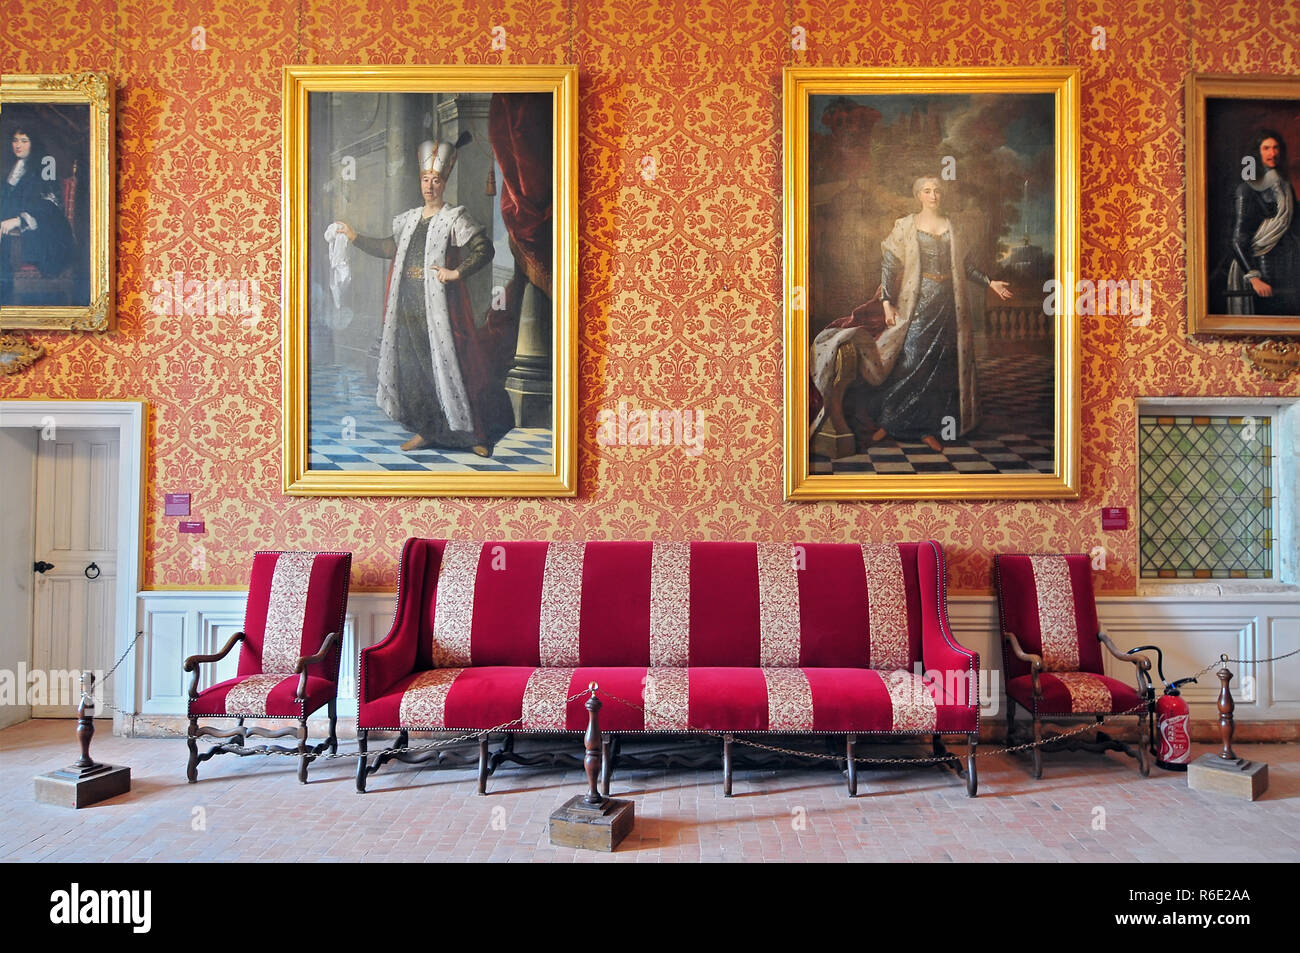 Interior Of Chateau De Chambord Royal Medieval French Castle Loire Valley France Europe Unesco Heritage Site Stock Photo